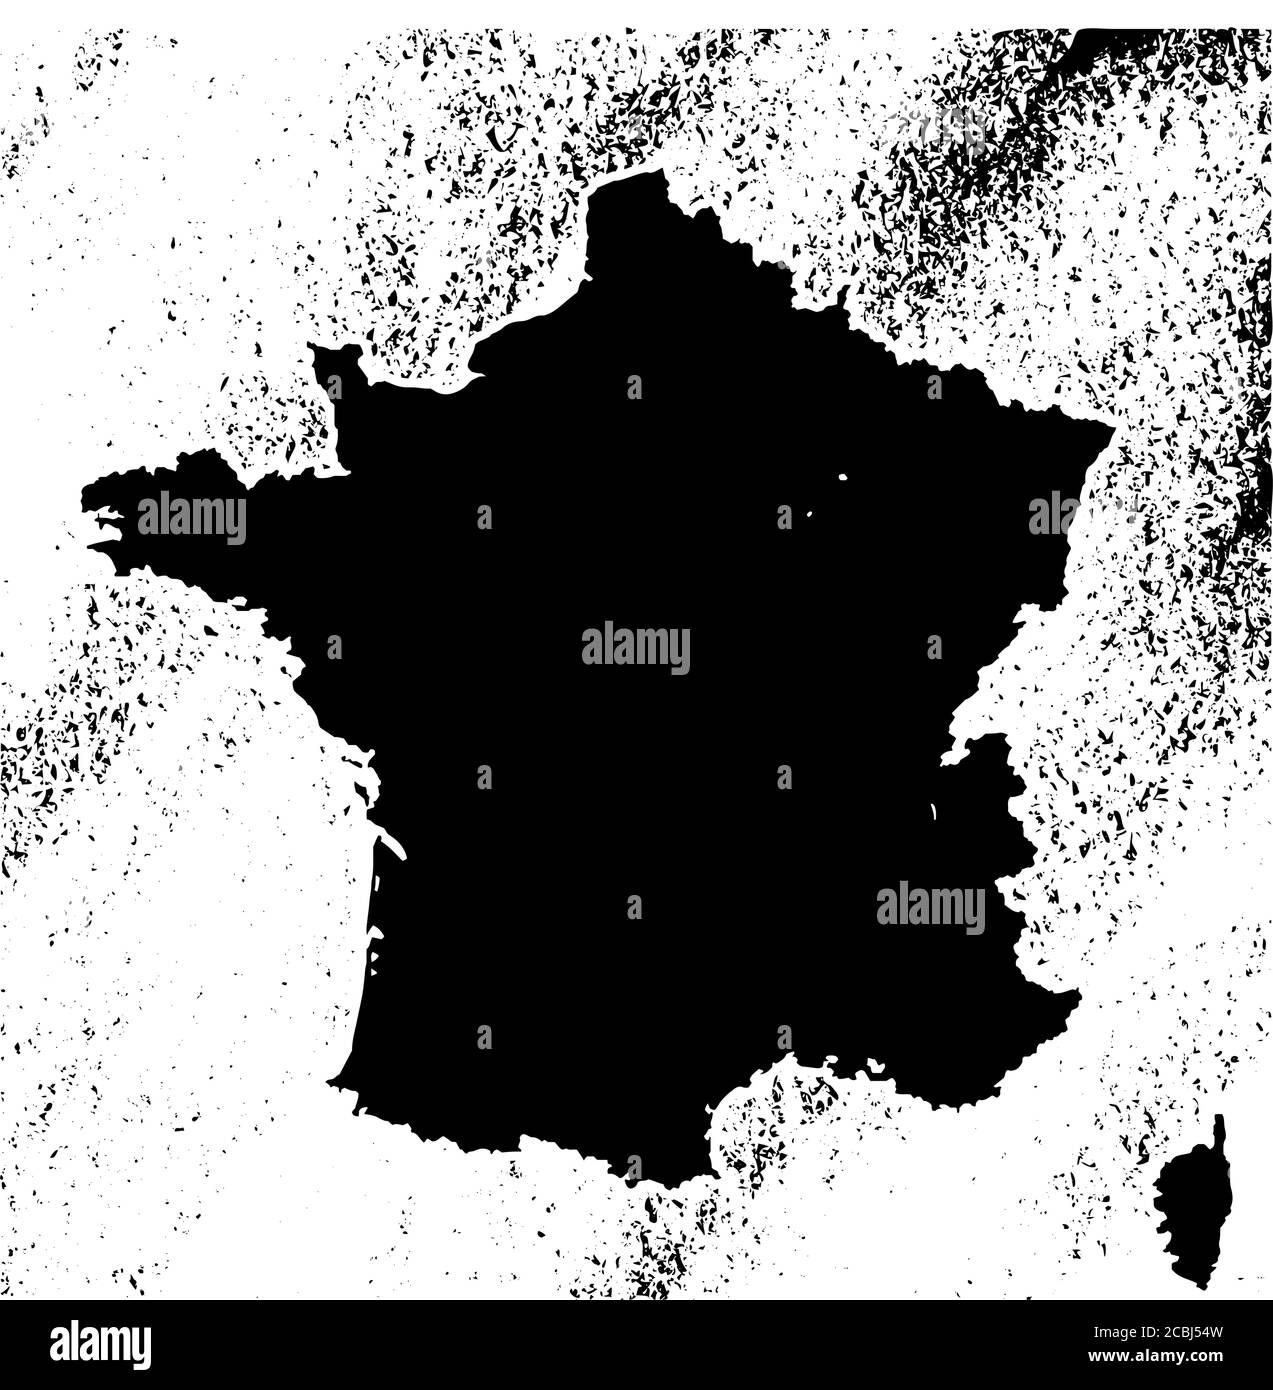 France map on vintage background. Black and white hand drawn illustration. Icon sign for print and labelling. Stock Vector